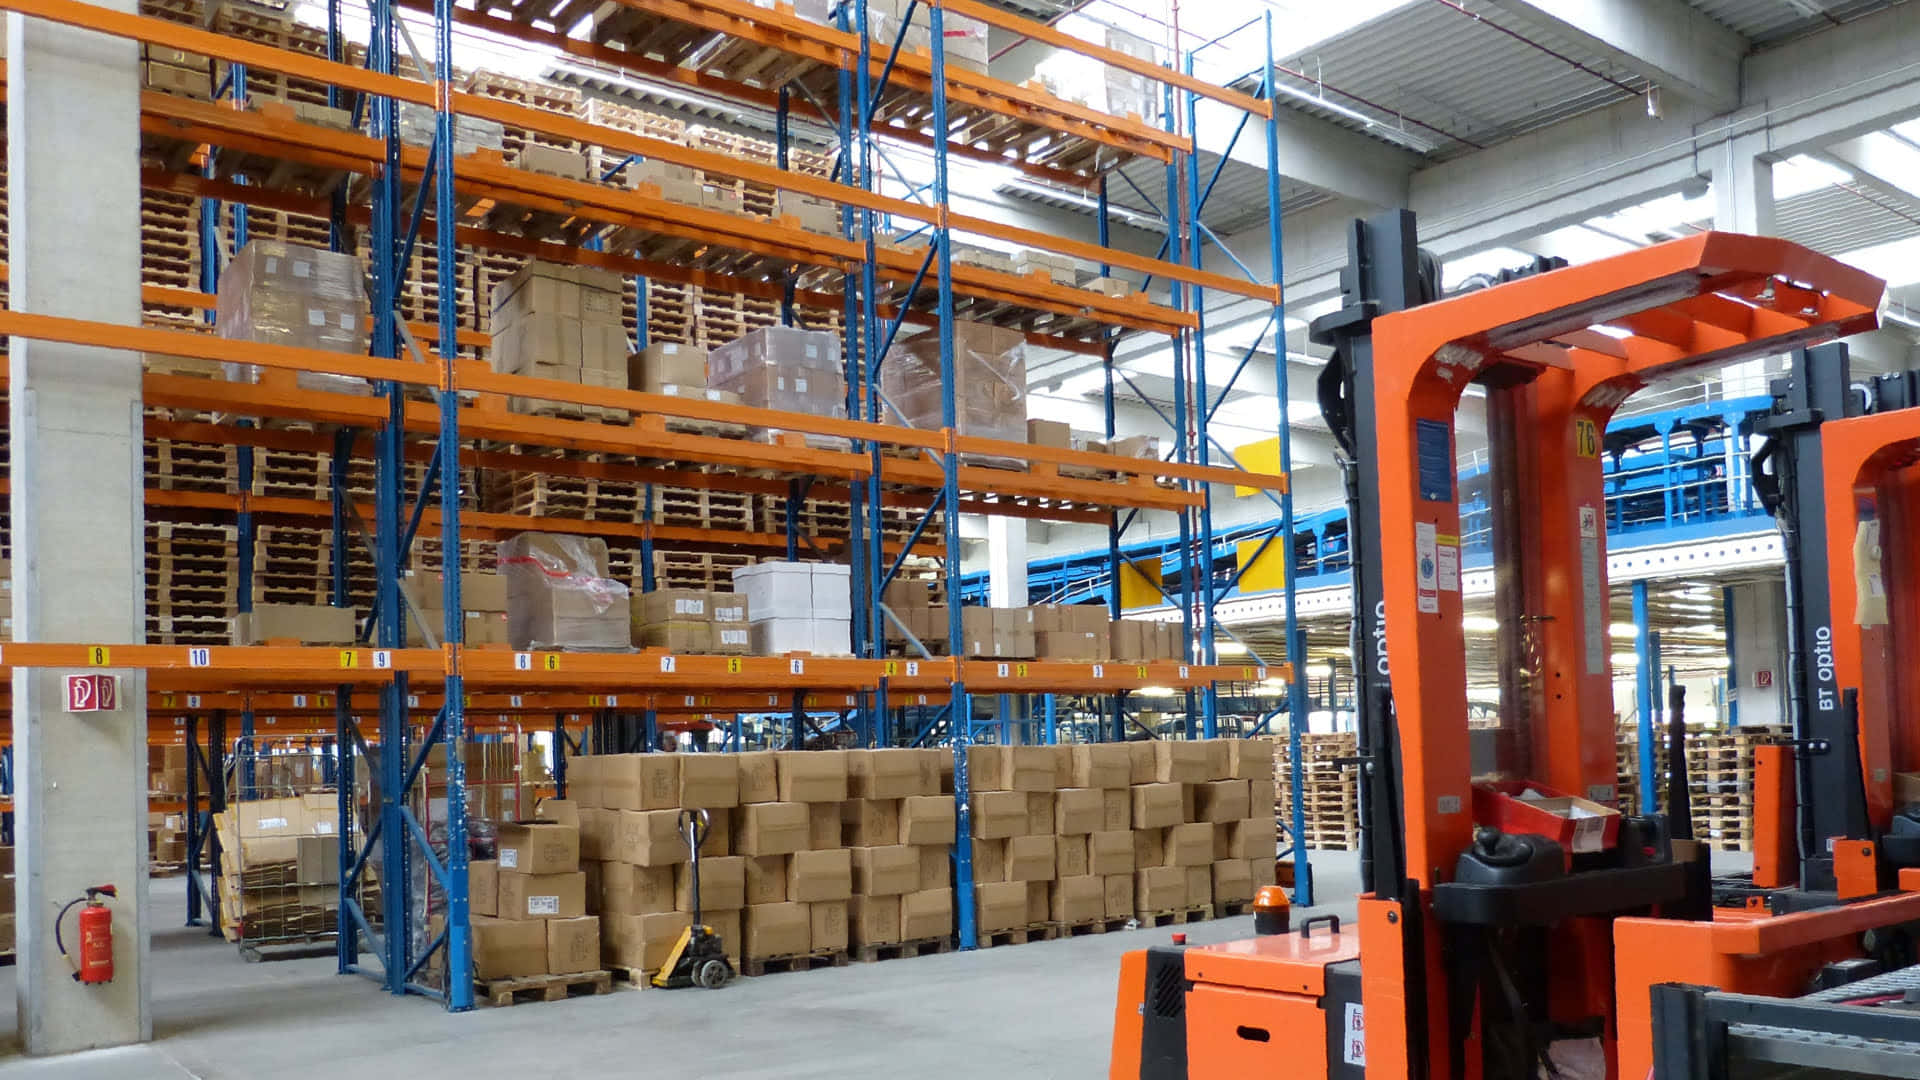 A Warehouse With Orange Forklifts And Boxes